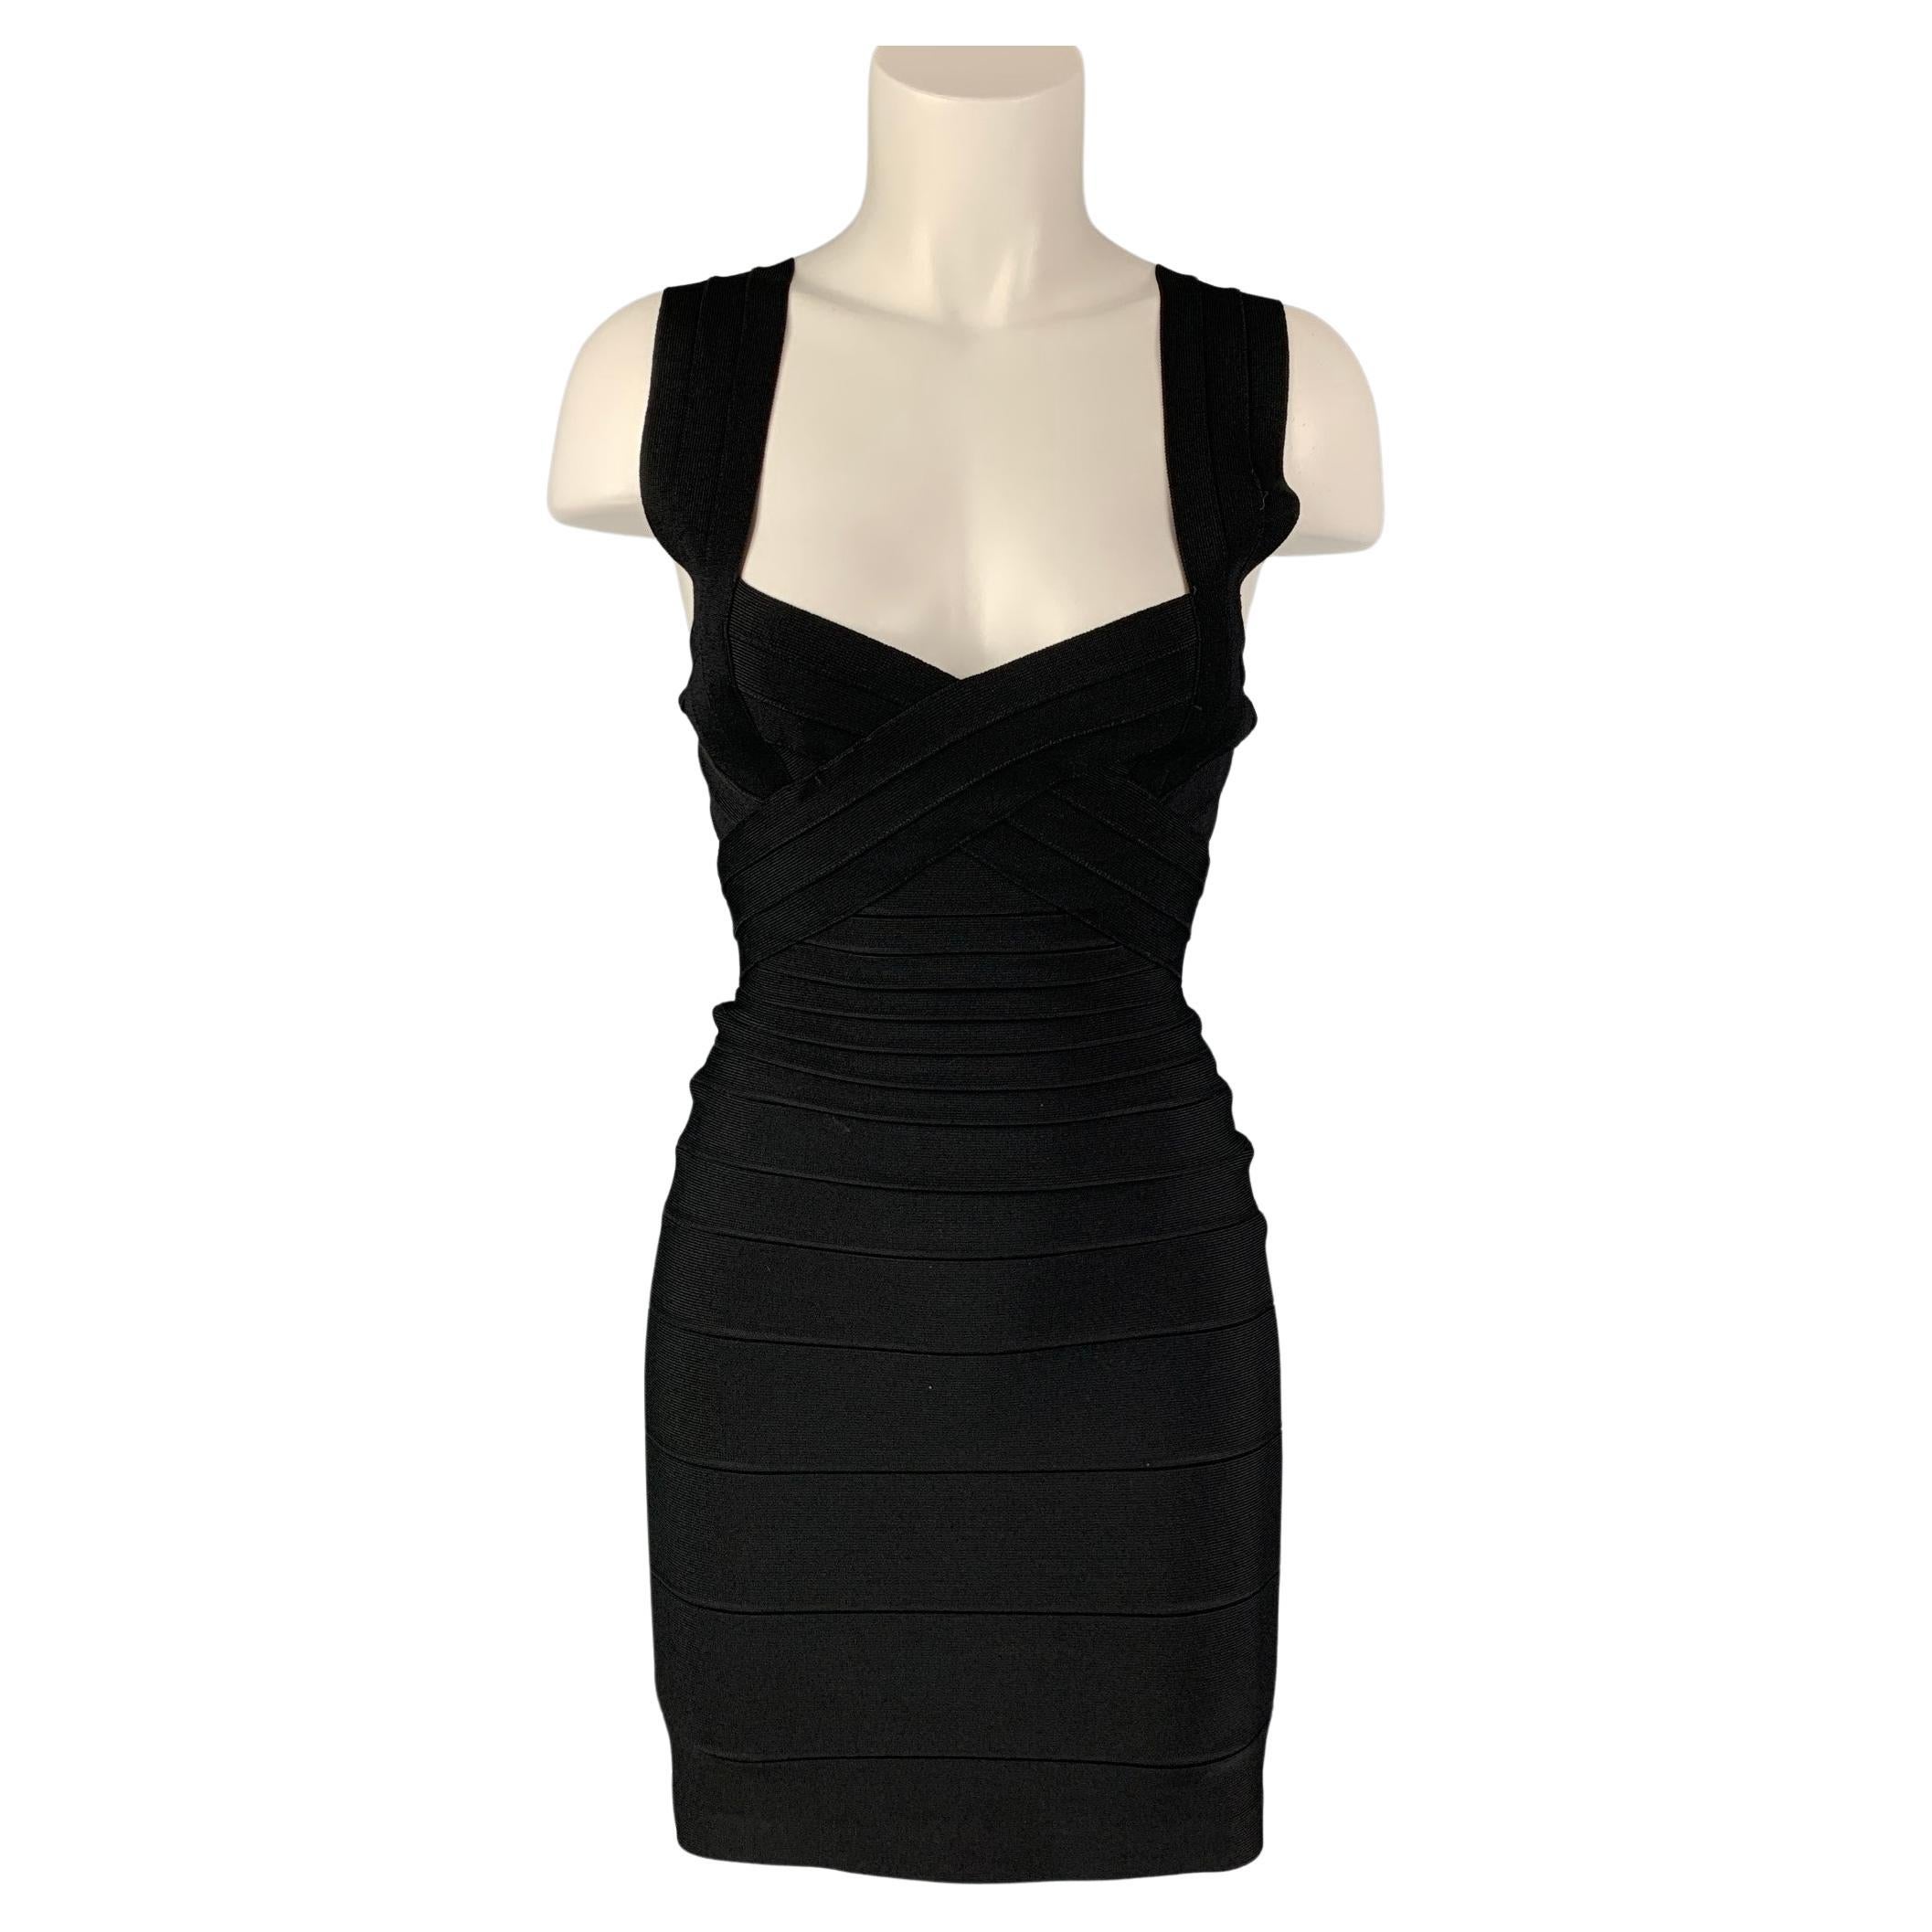 HERVE LEGER Size XS Black Rayon Blend Fitted Cocktail Dress